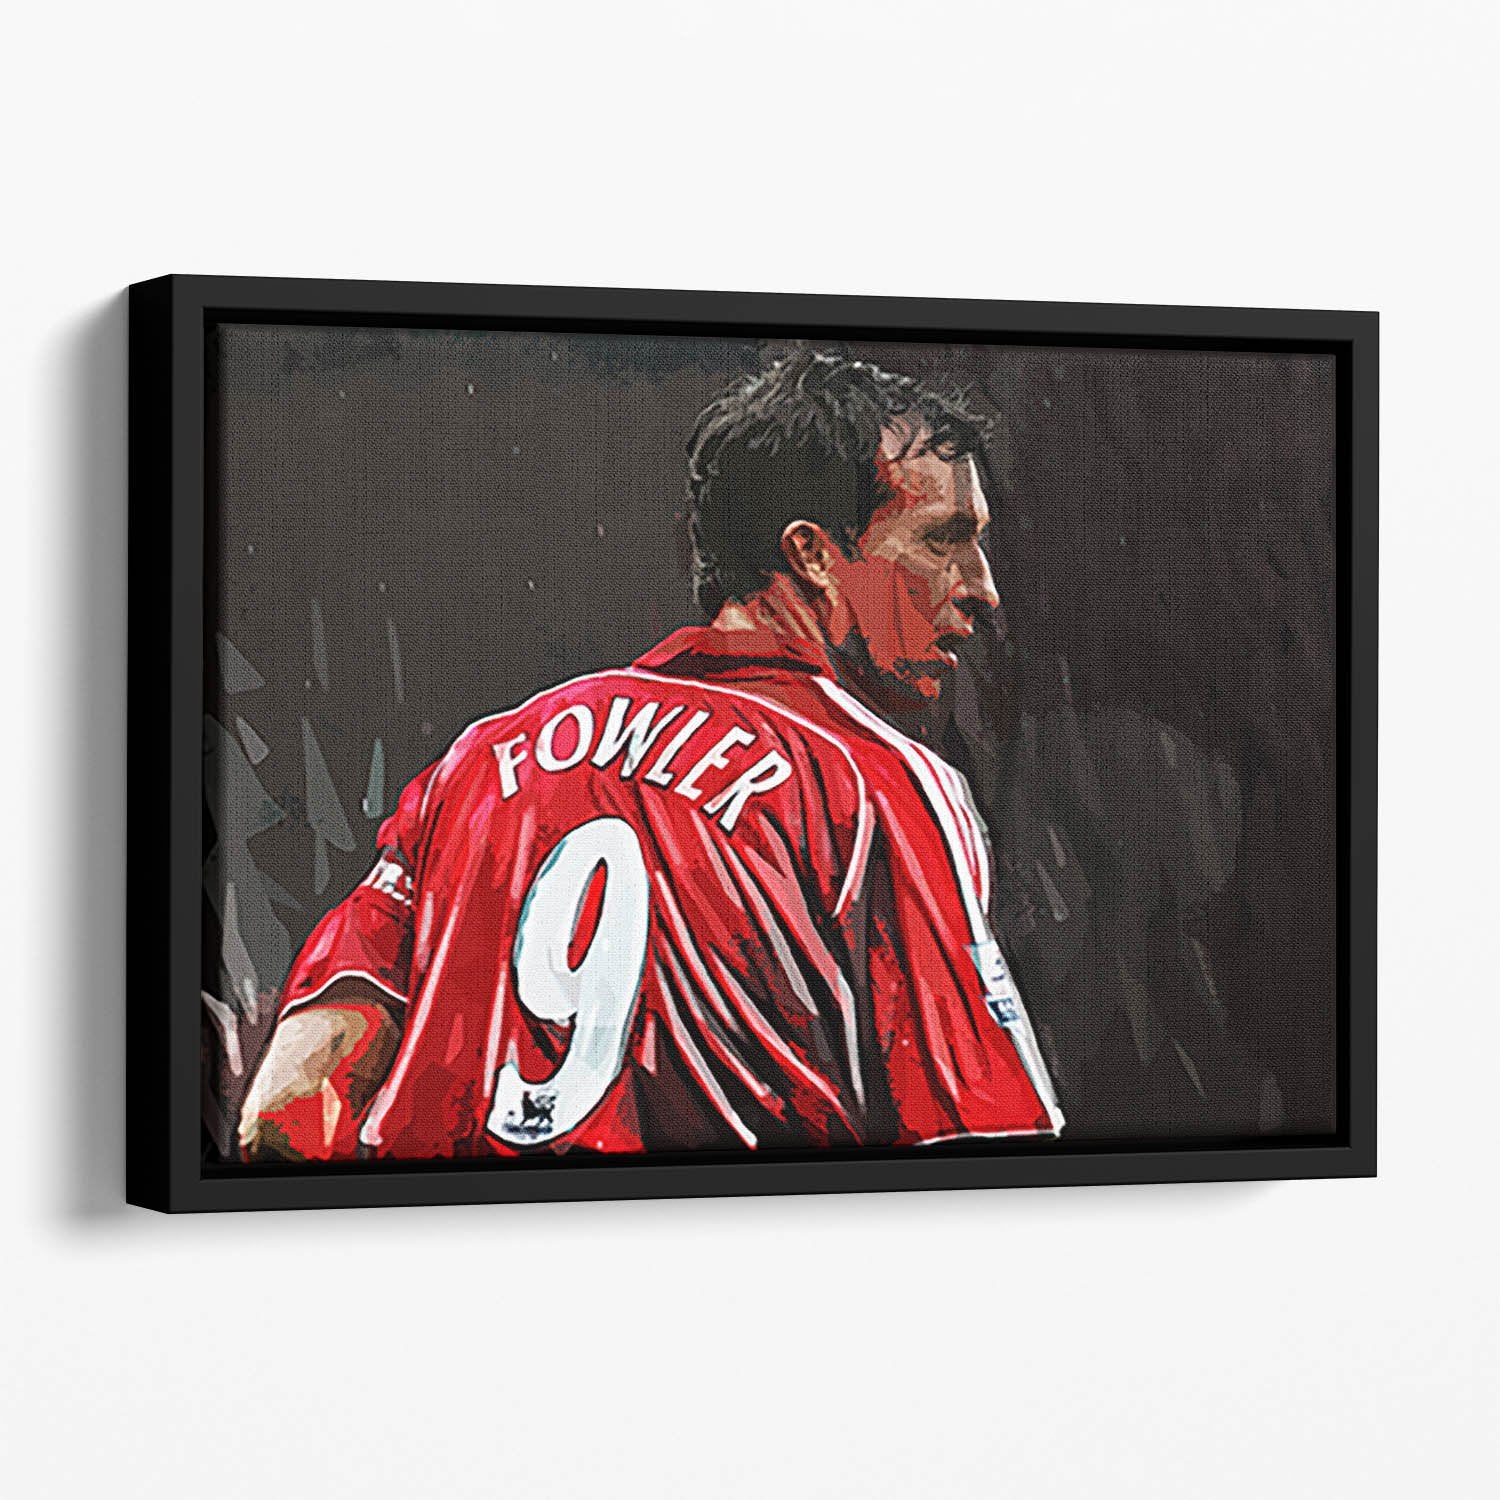 Robbie Fowler Liverpool Floating Framed Canvas